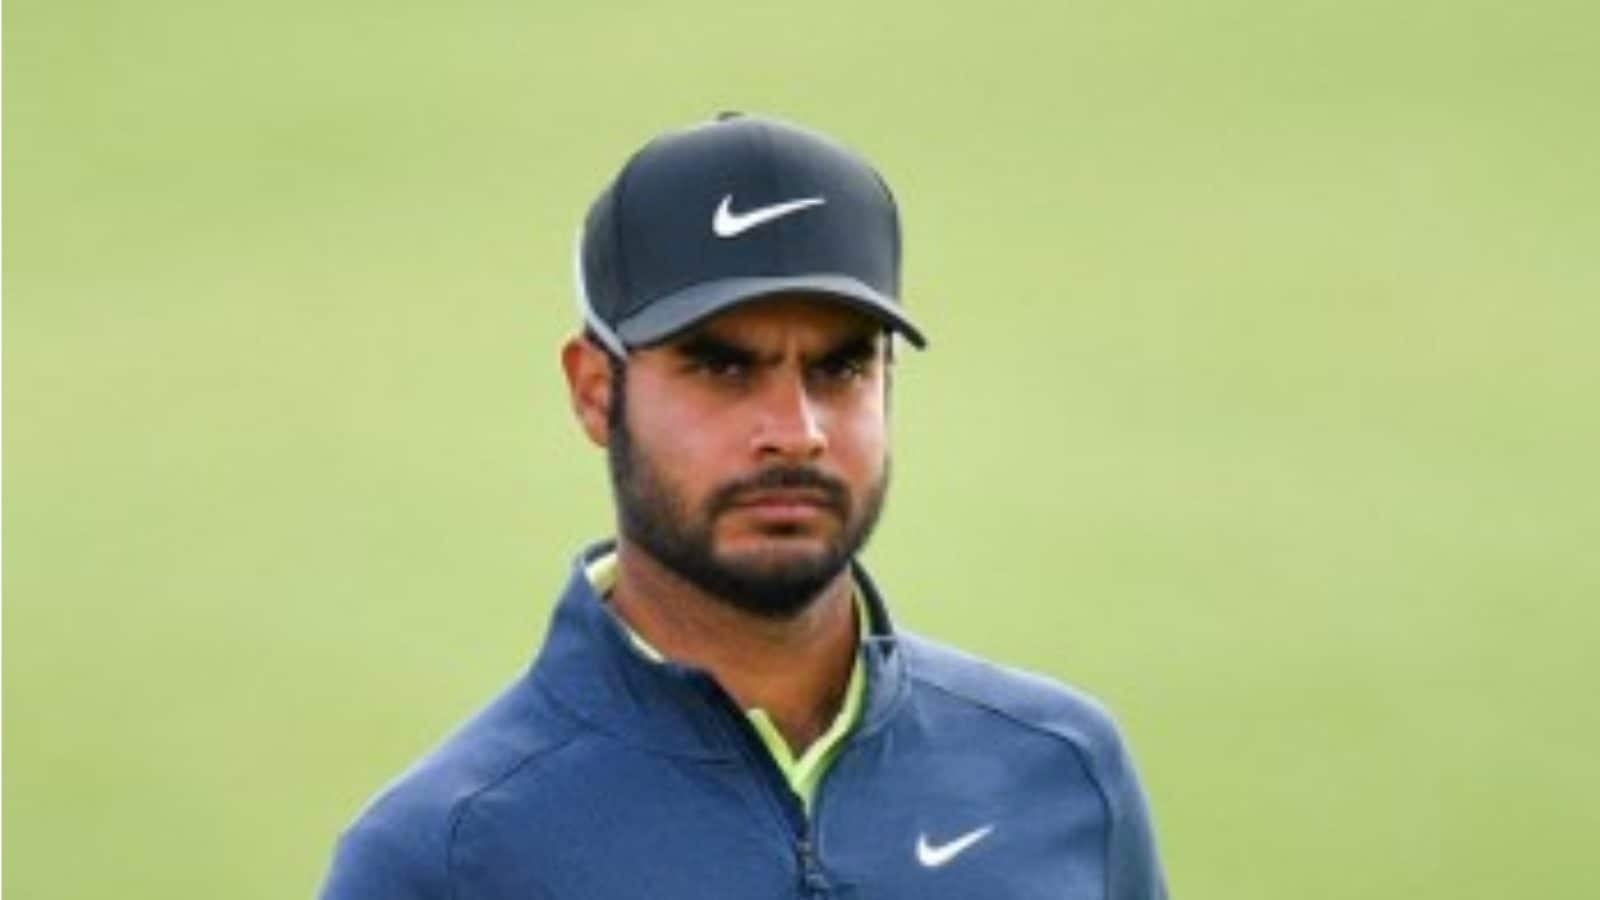 Shubhankar Sharma Ends Run of Missed Cuts to Finish T-52 in Denmark